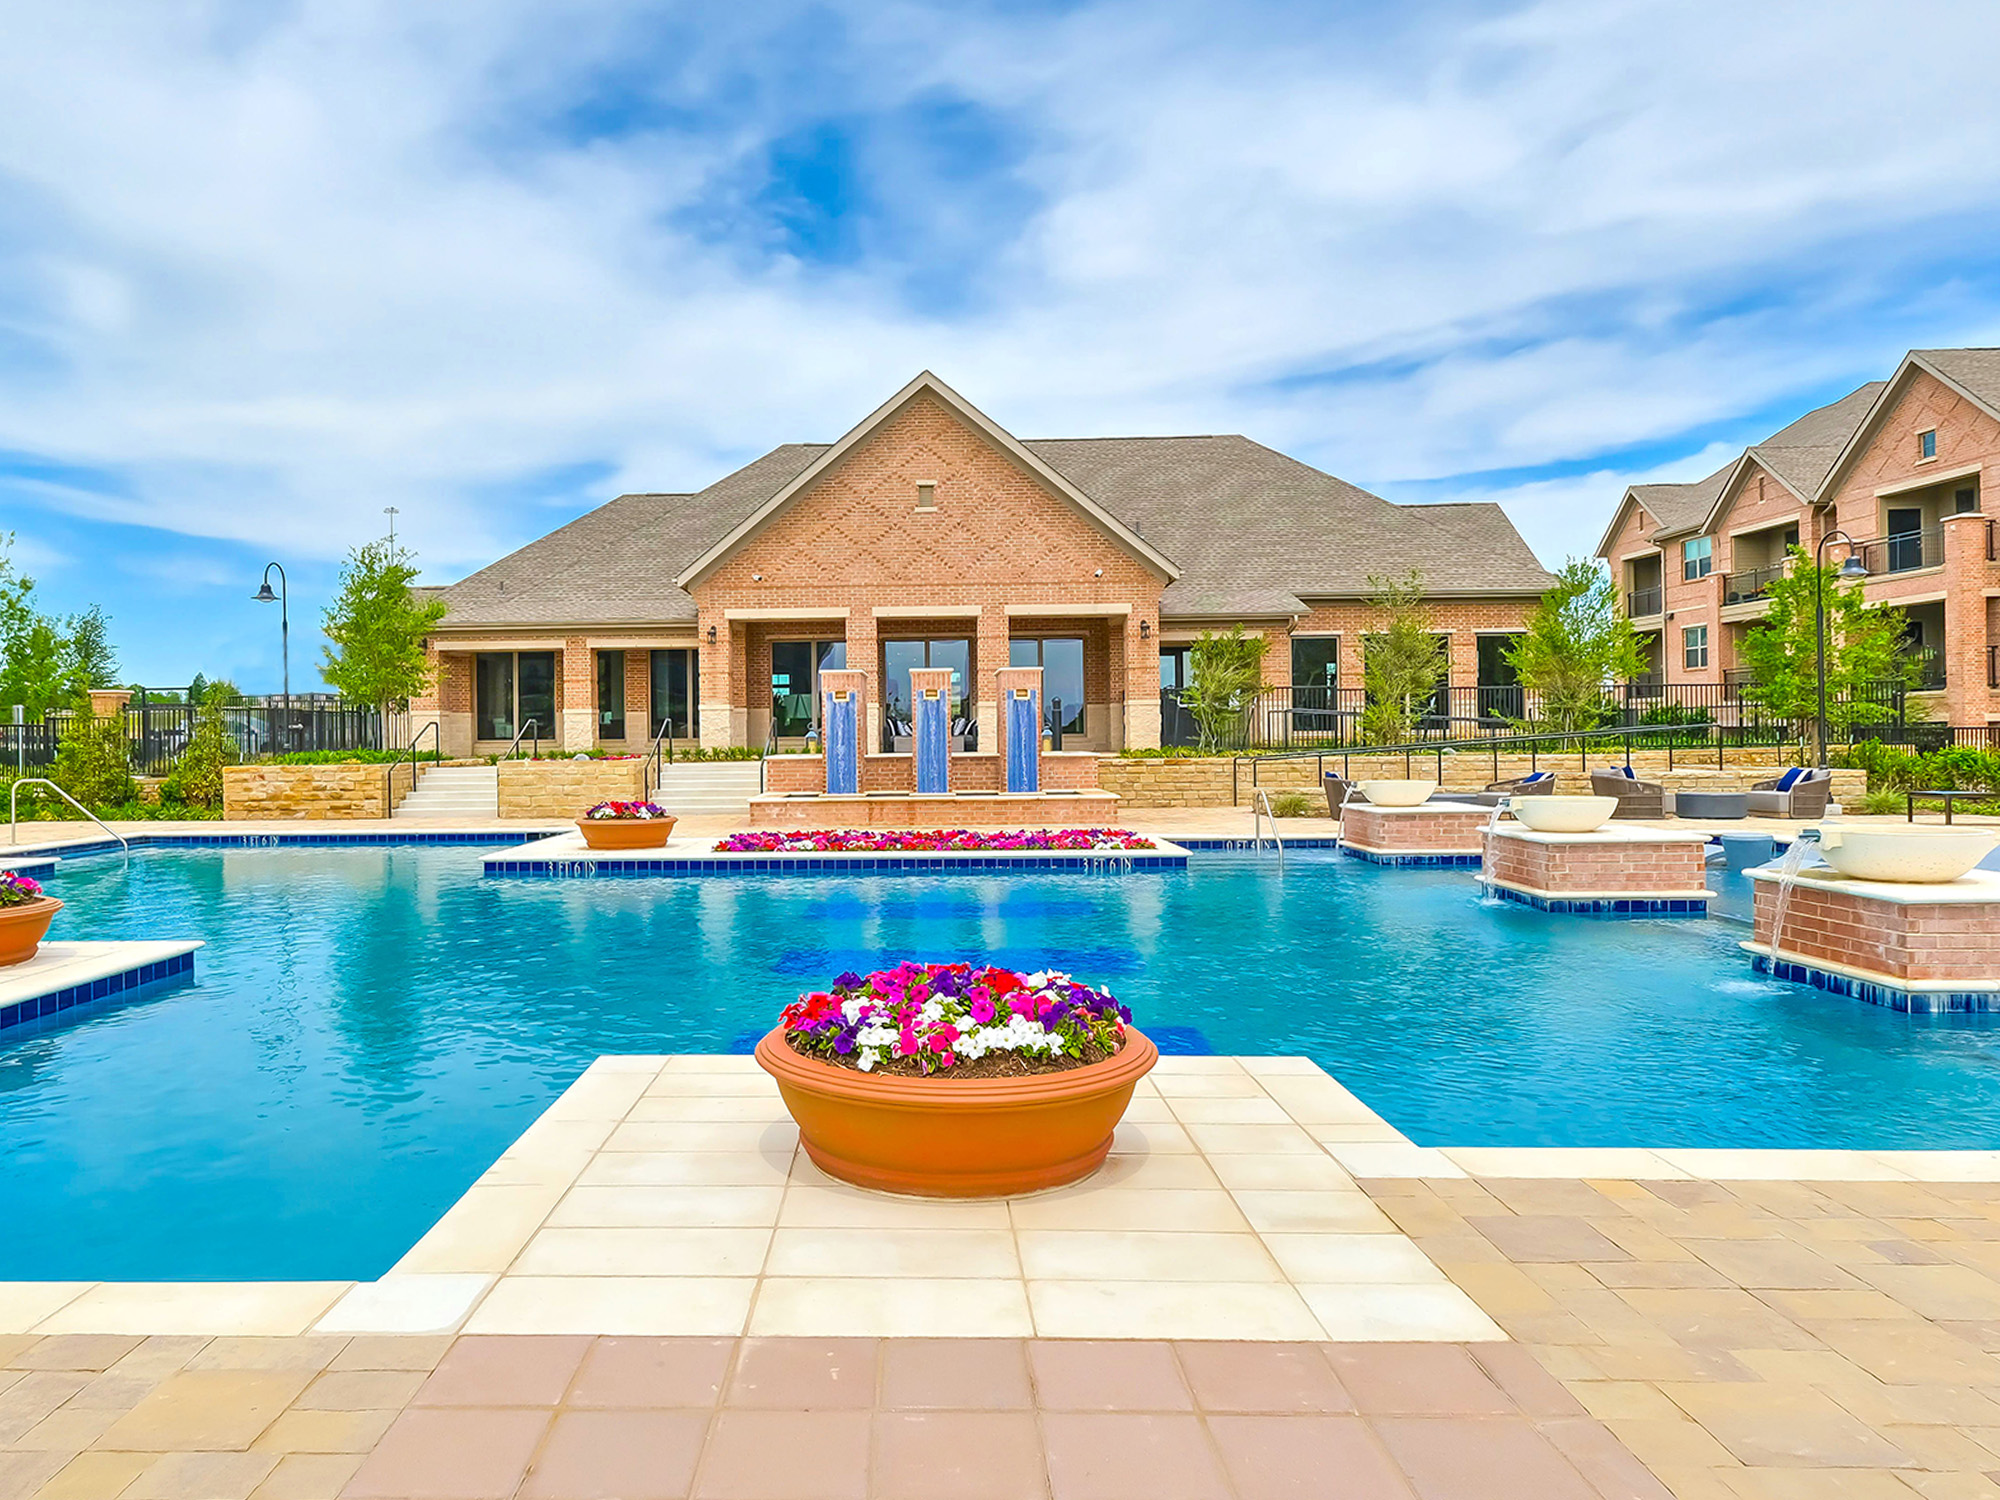 The pool area with flower garden at AVE Las Colinas apartment community